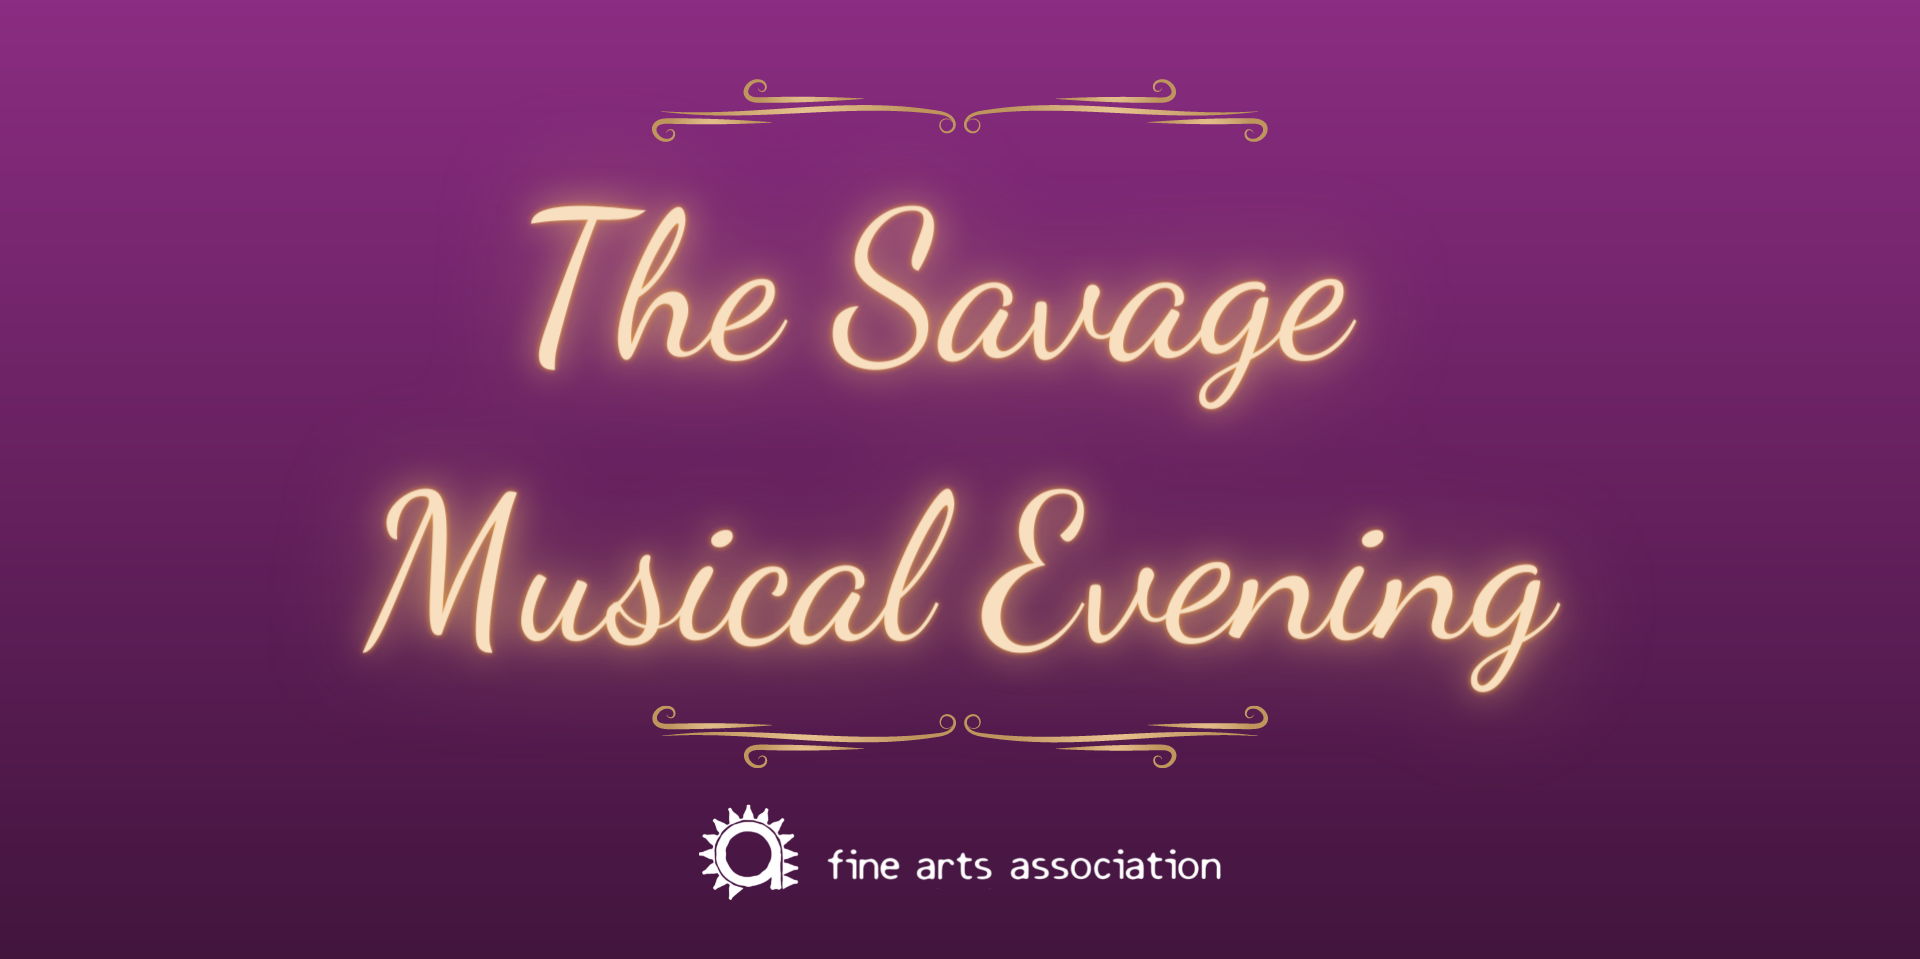 The Savage Musical Evening promotional image